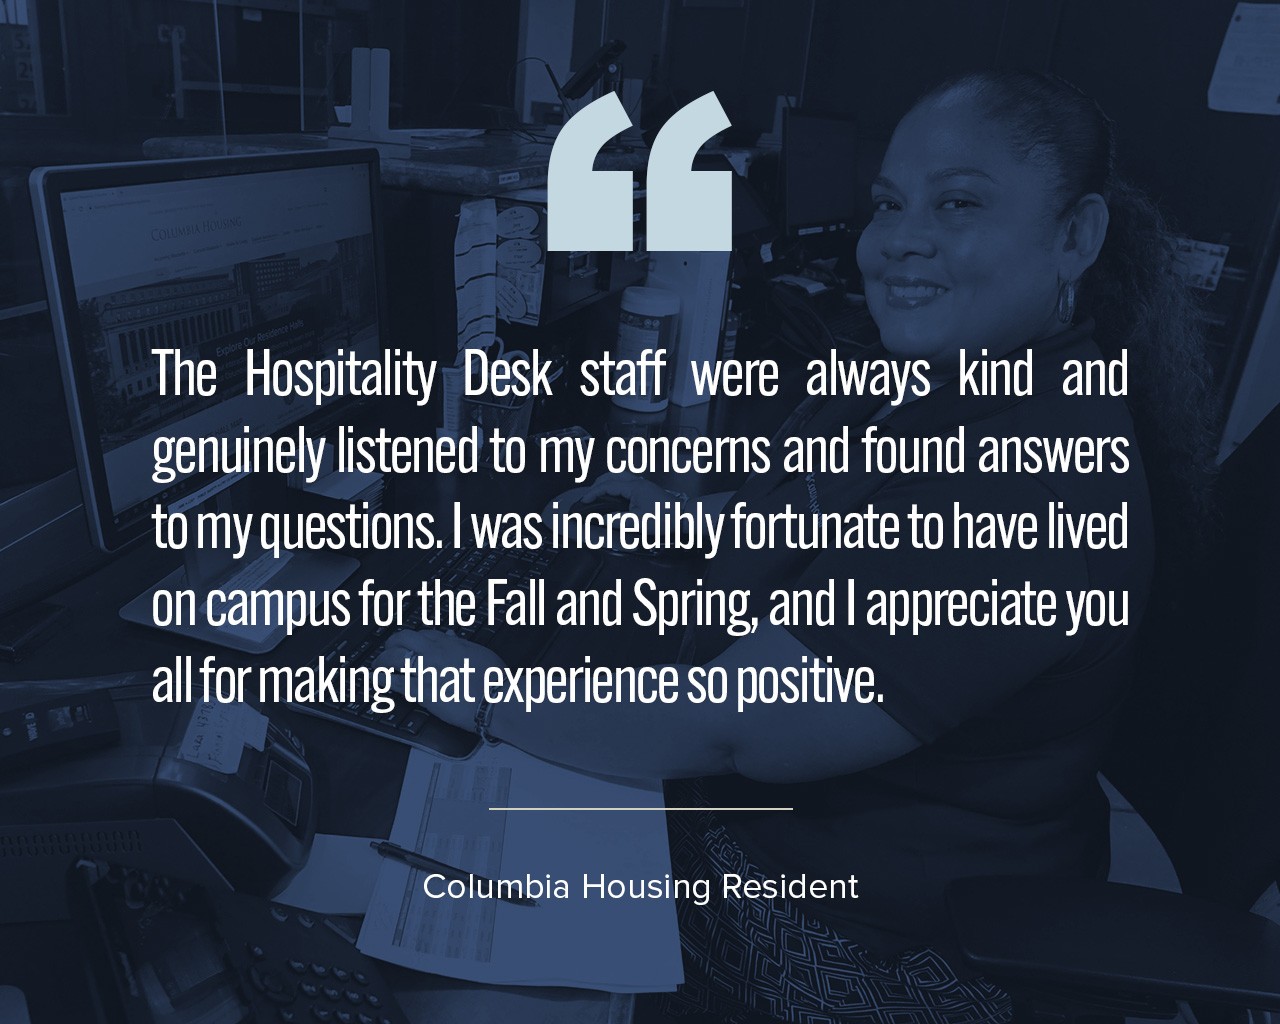 A quote that says, "The Hospitality Desk staff were always kind and genuinely listened to my concerns and found answers to my questions. I was incredibly fortunate to have lived on campus for the Fall and Spring, and I appreciate you all for making that experience so positive."